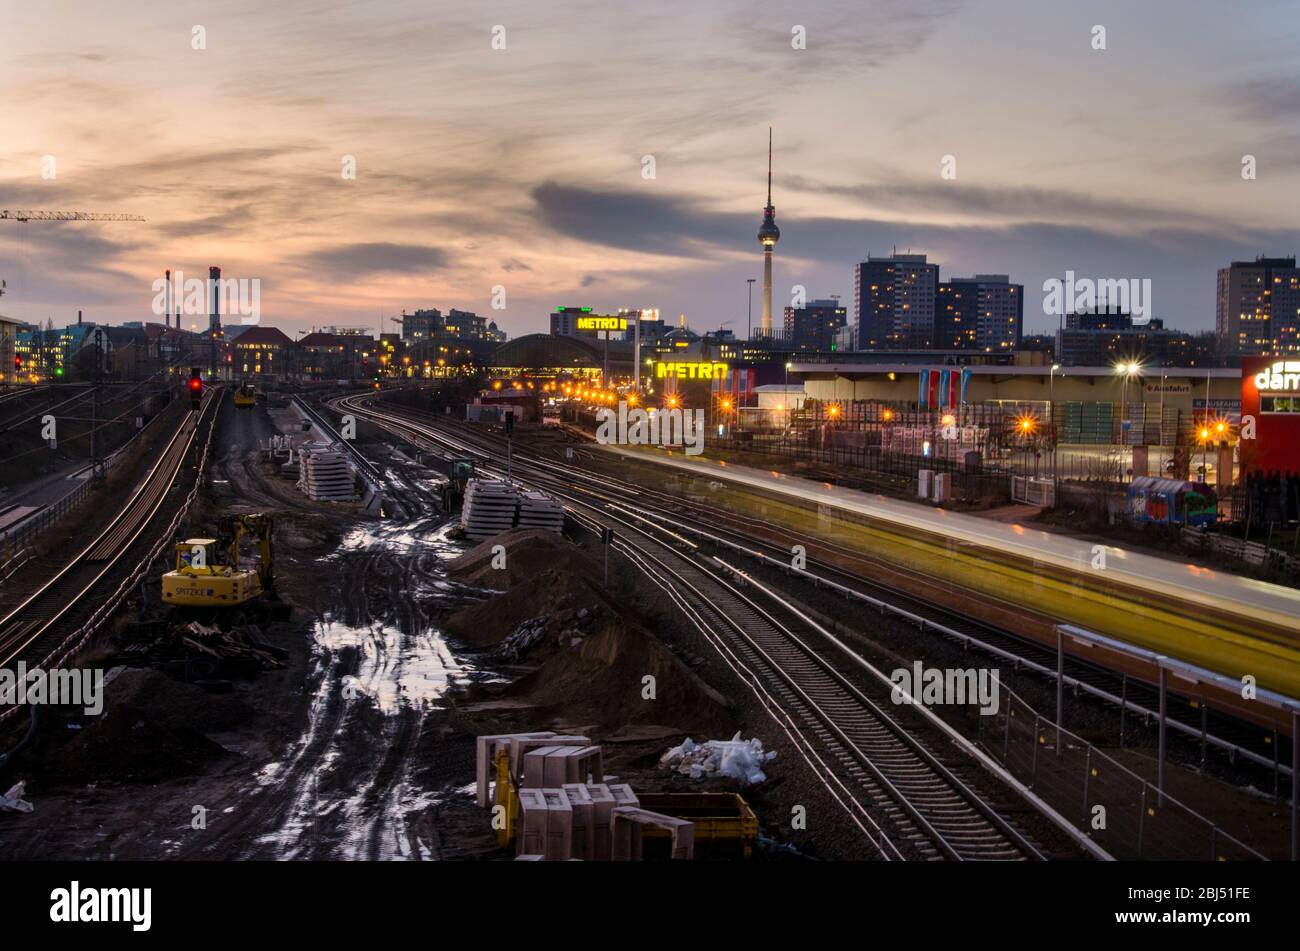 Long exposure of a train pulling into Warschauer Strasse Station in Berlin. Stock Photo